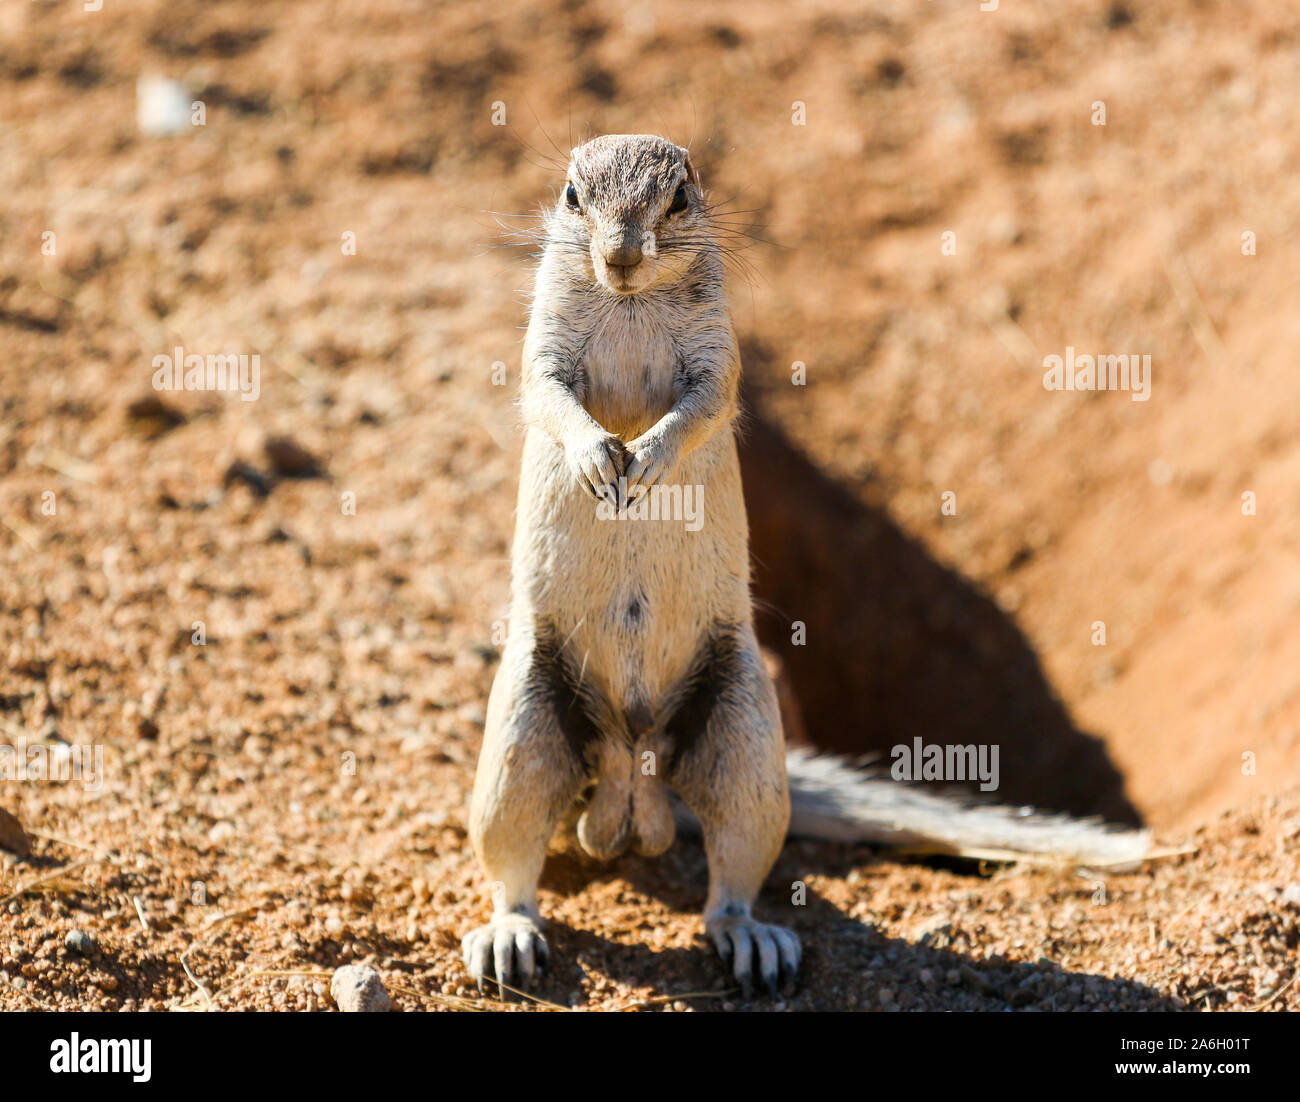 Ground squirrel in Namibia Stock Photo